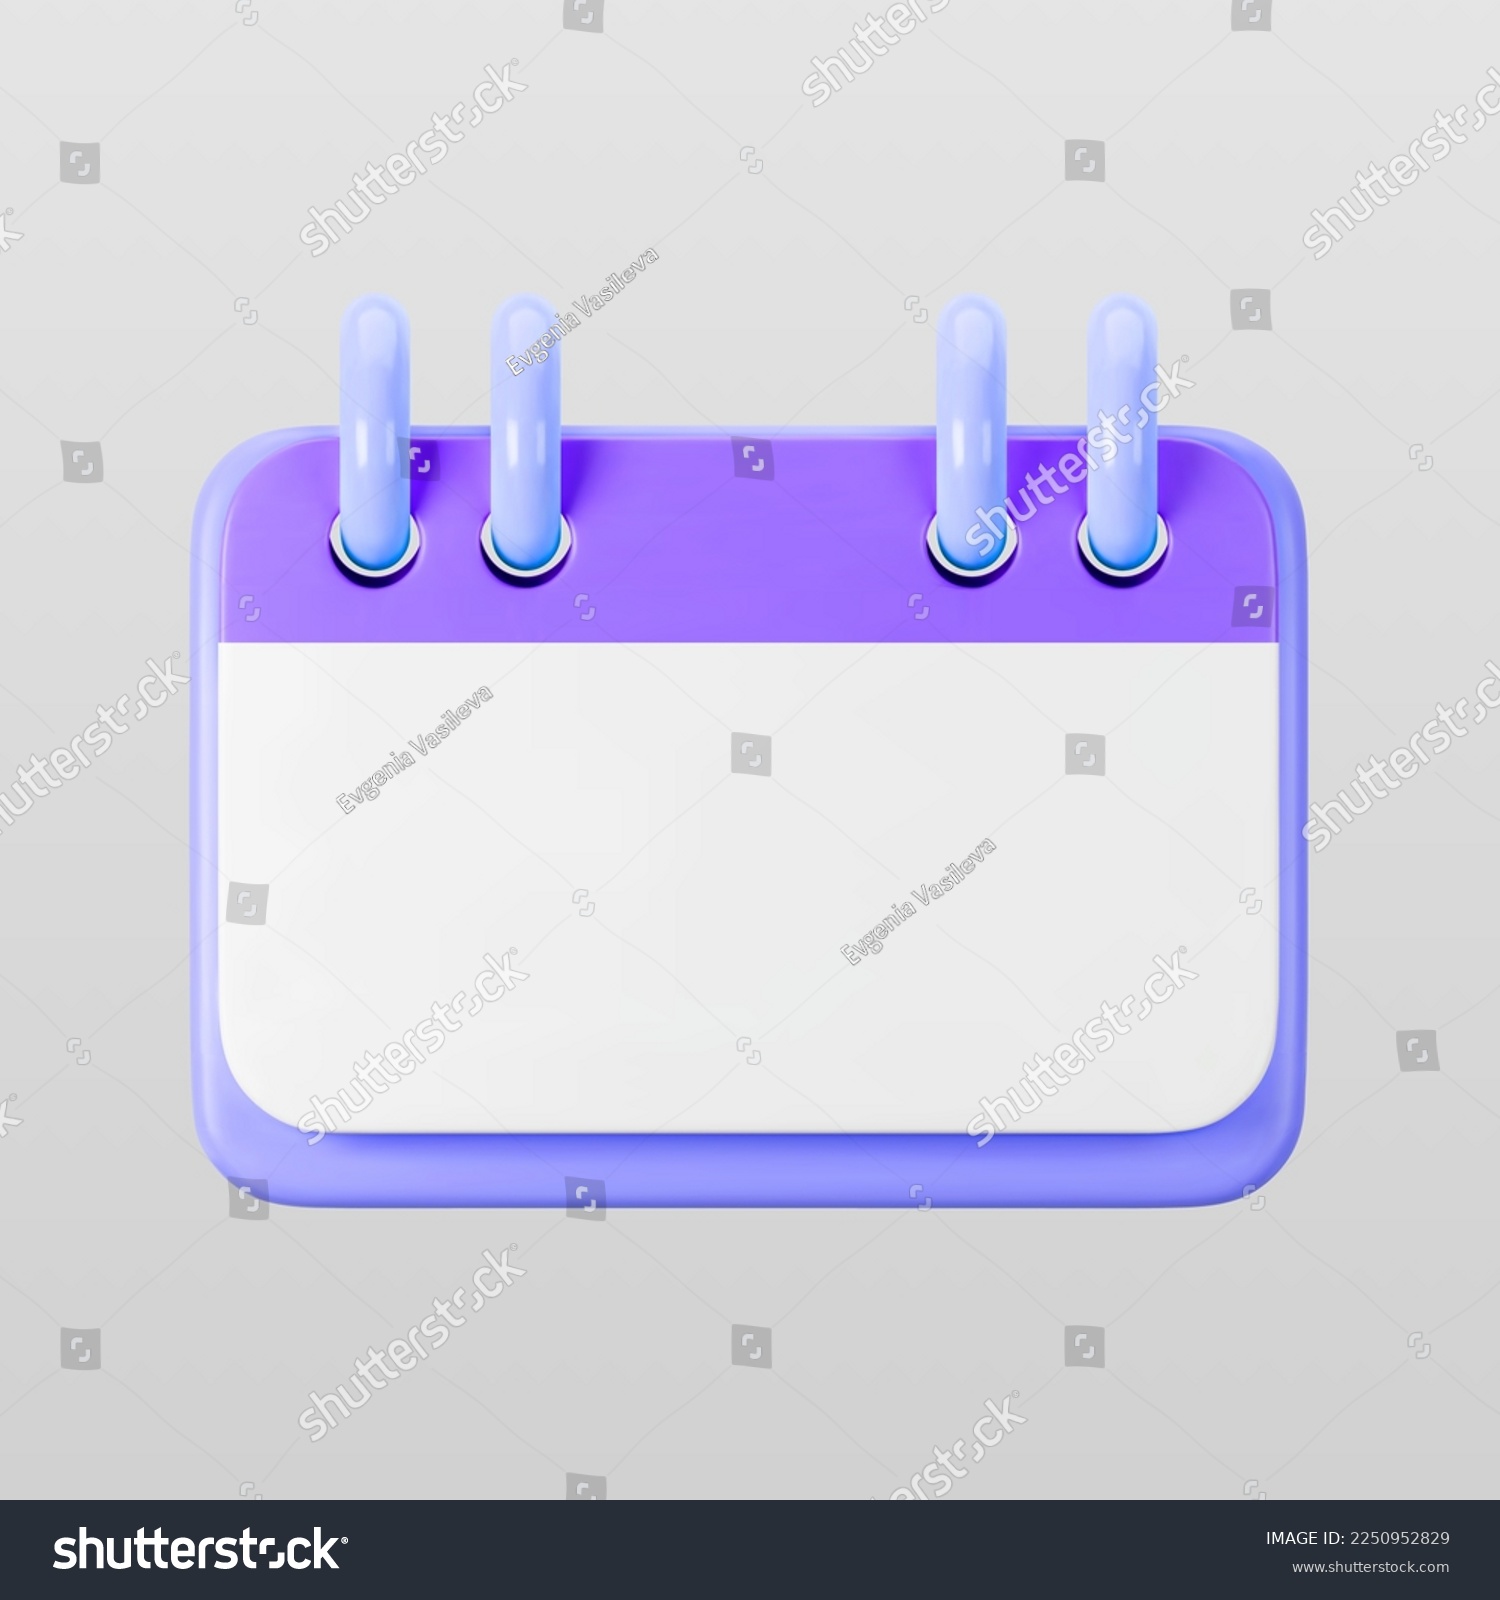 SVG of 3d purple calendar icon on gray background. Render of daily birthday schedule planner, valentine's or wedding day. Calendar events plan, work planning concept. 3d cartoon simple vector illustration svg